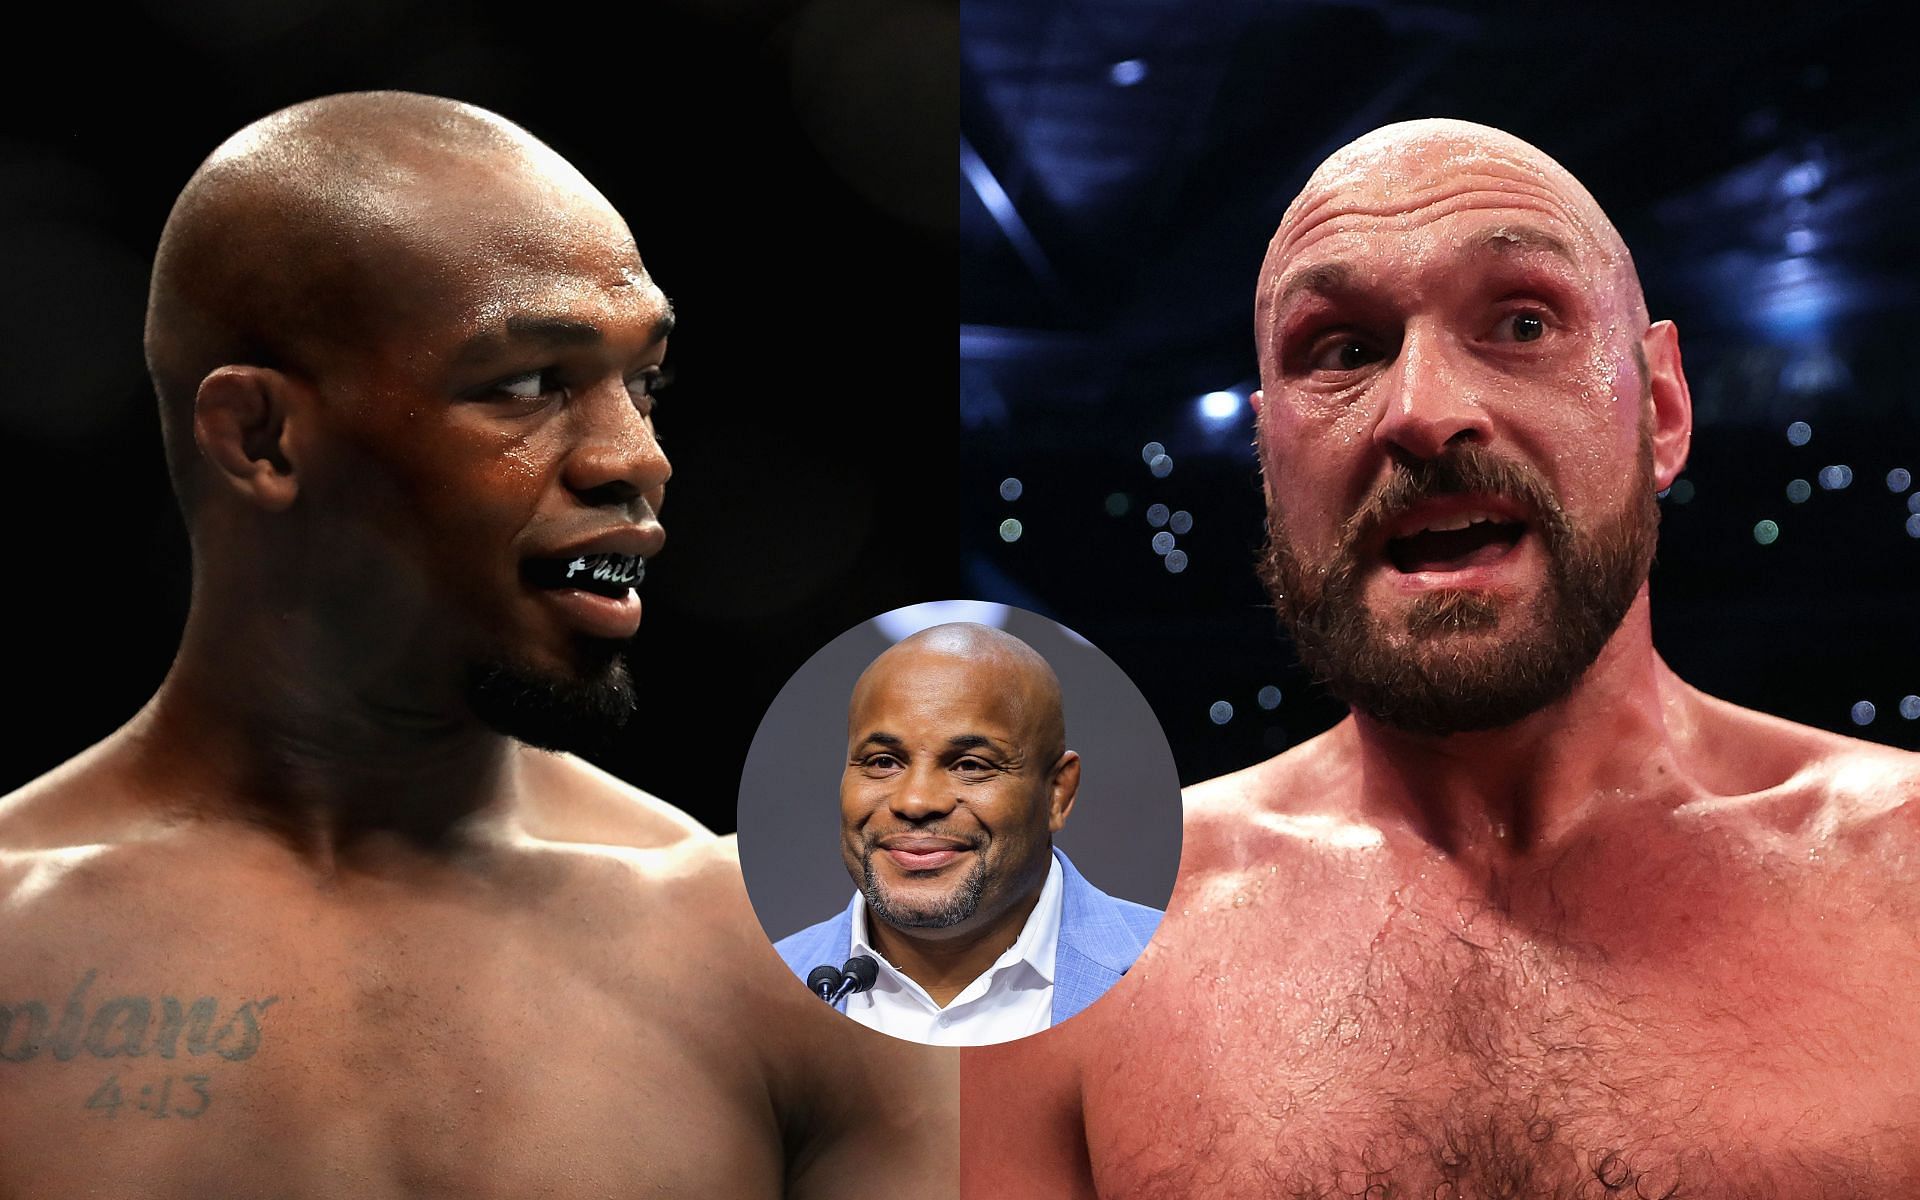 Tyson Fury Daniel Cormier claims Tyson Fury has same chance as normal person of beating Jon Jones in a fight